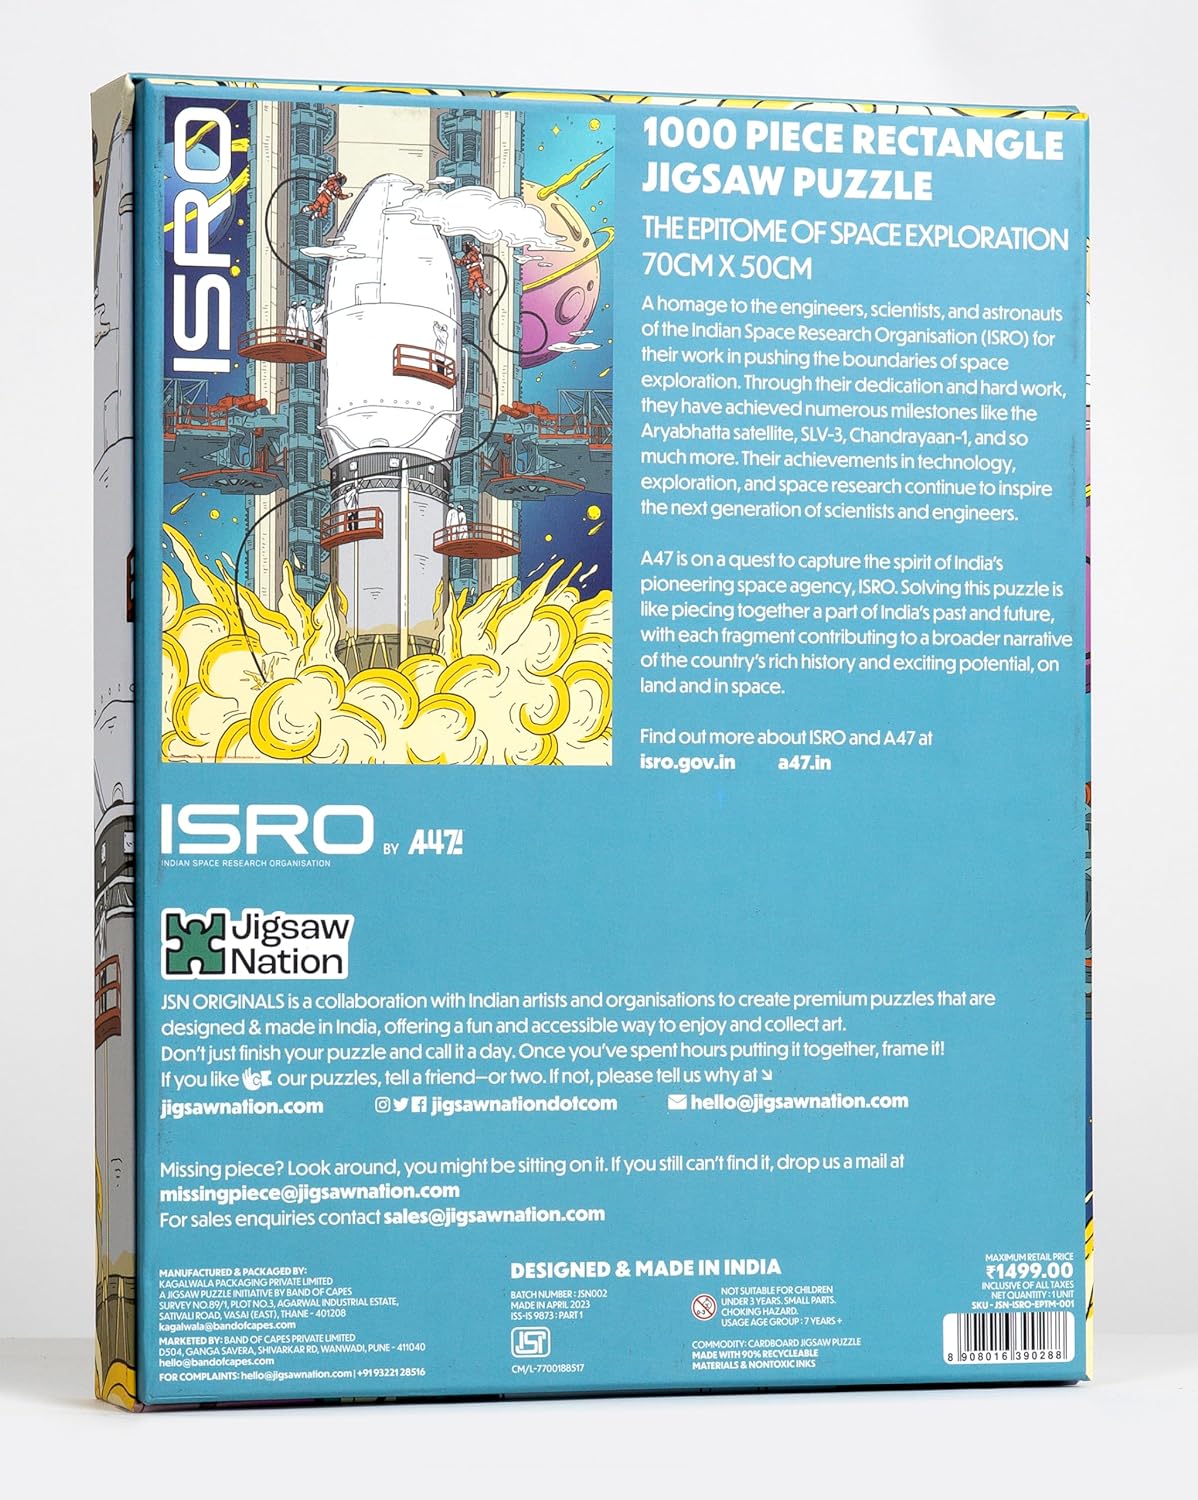 Jigsaw Nation: The Epitome of Space Exploration – ISRO by A47 – 1000 Piece Jigsaw Puzzle